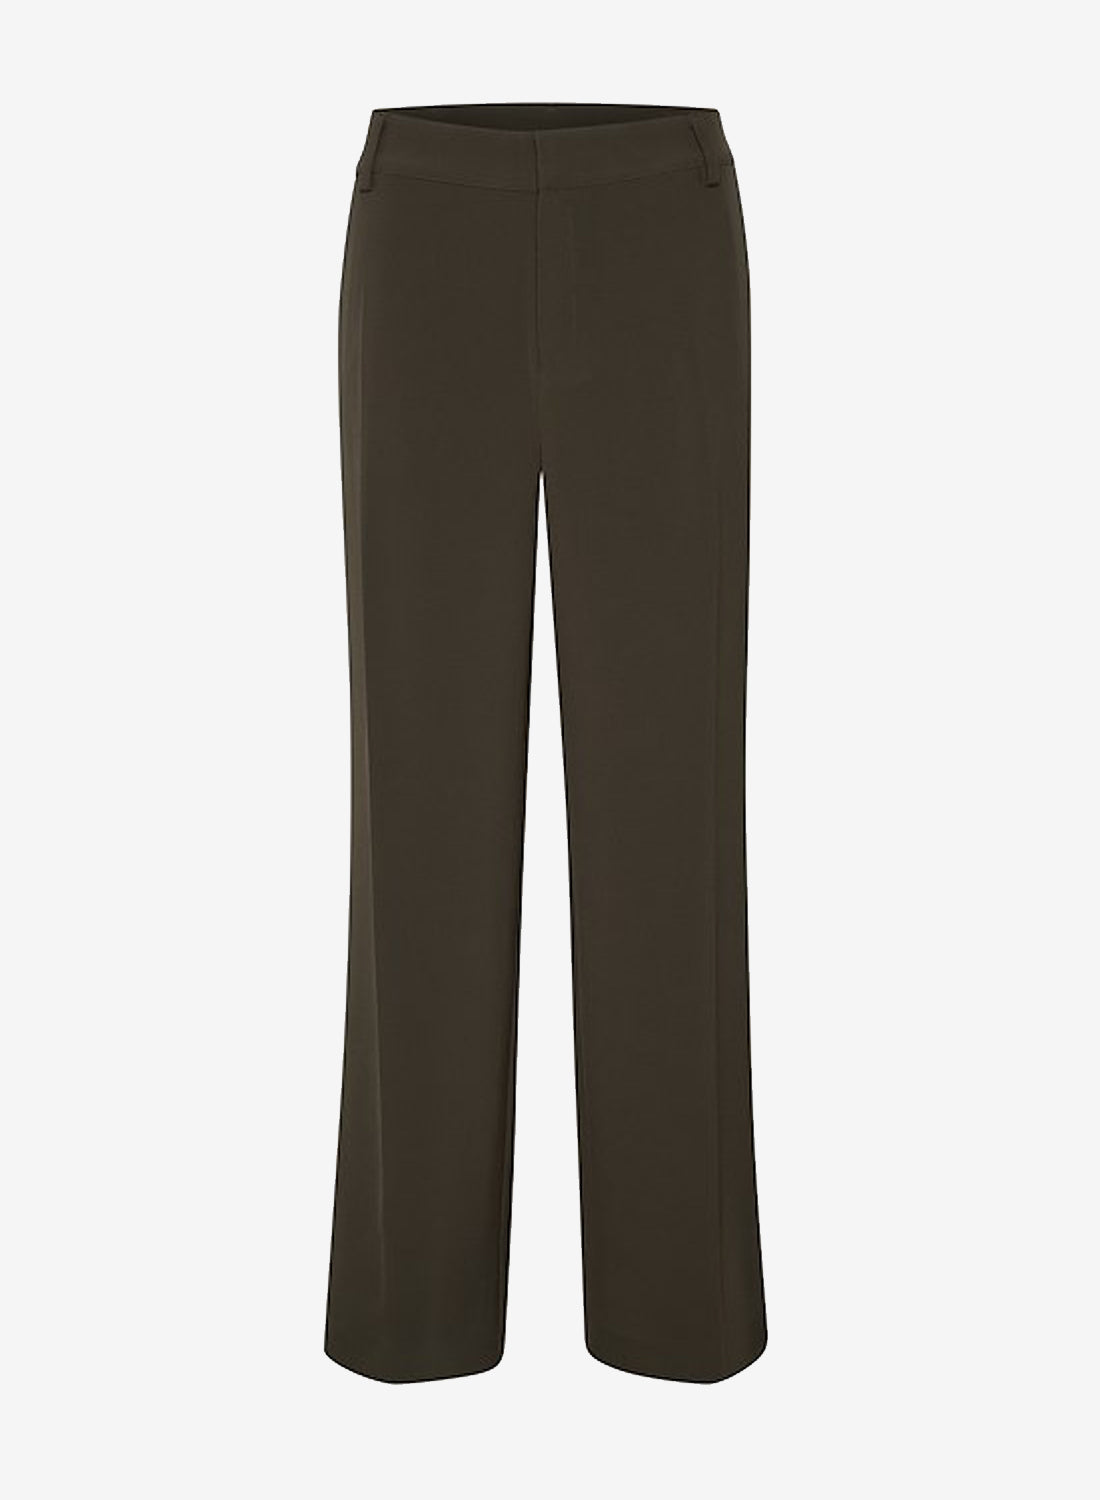 Billede af My Essential Wardrobe 29 The Tailored Pant Delicioso